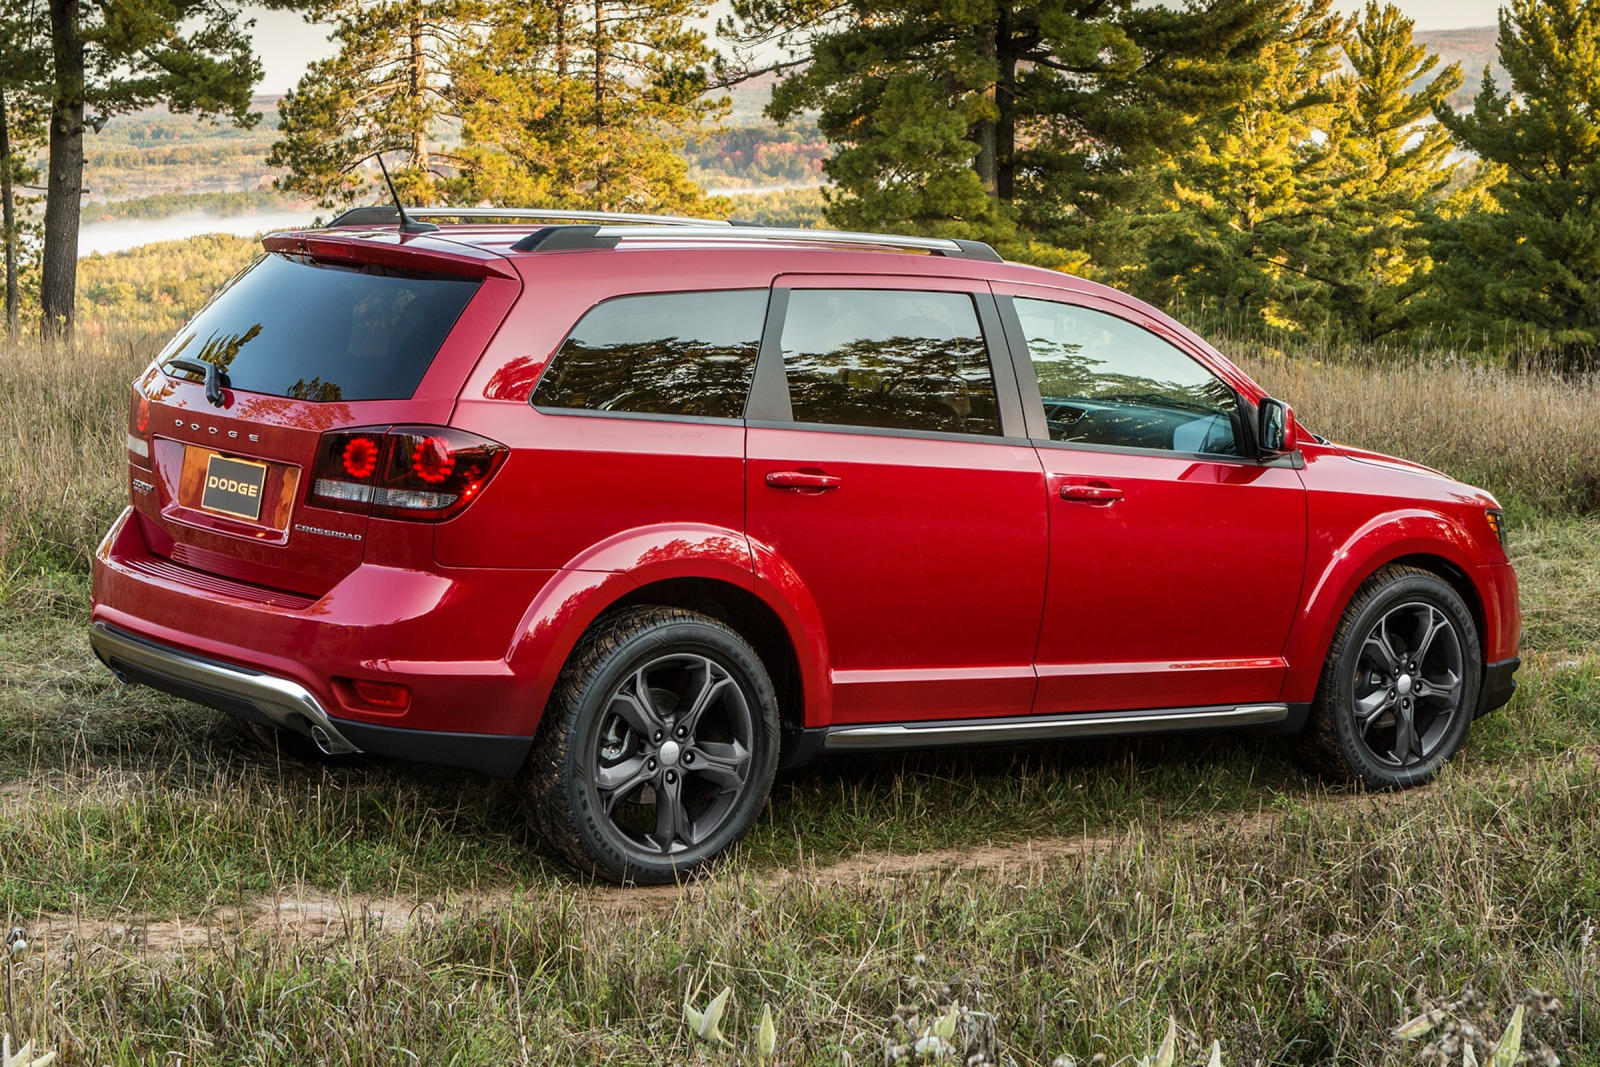 2020 Dodge Journey Review, Pricing Journey SUV Models CarBuzz